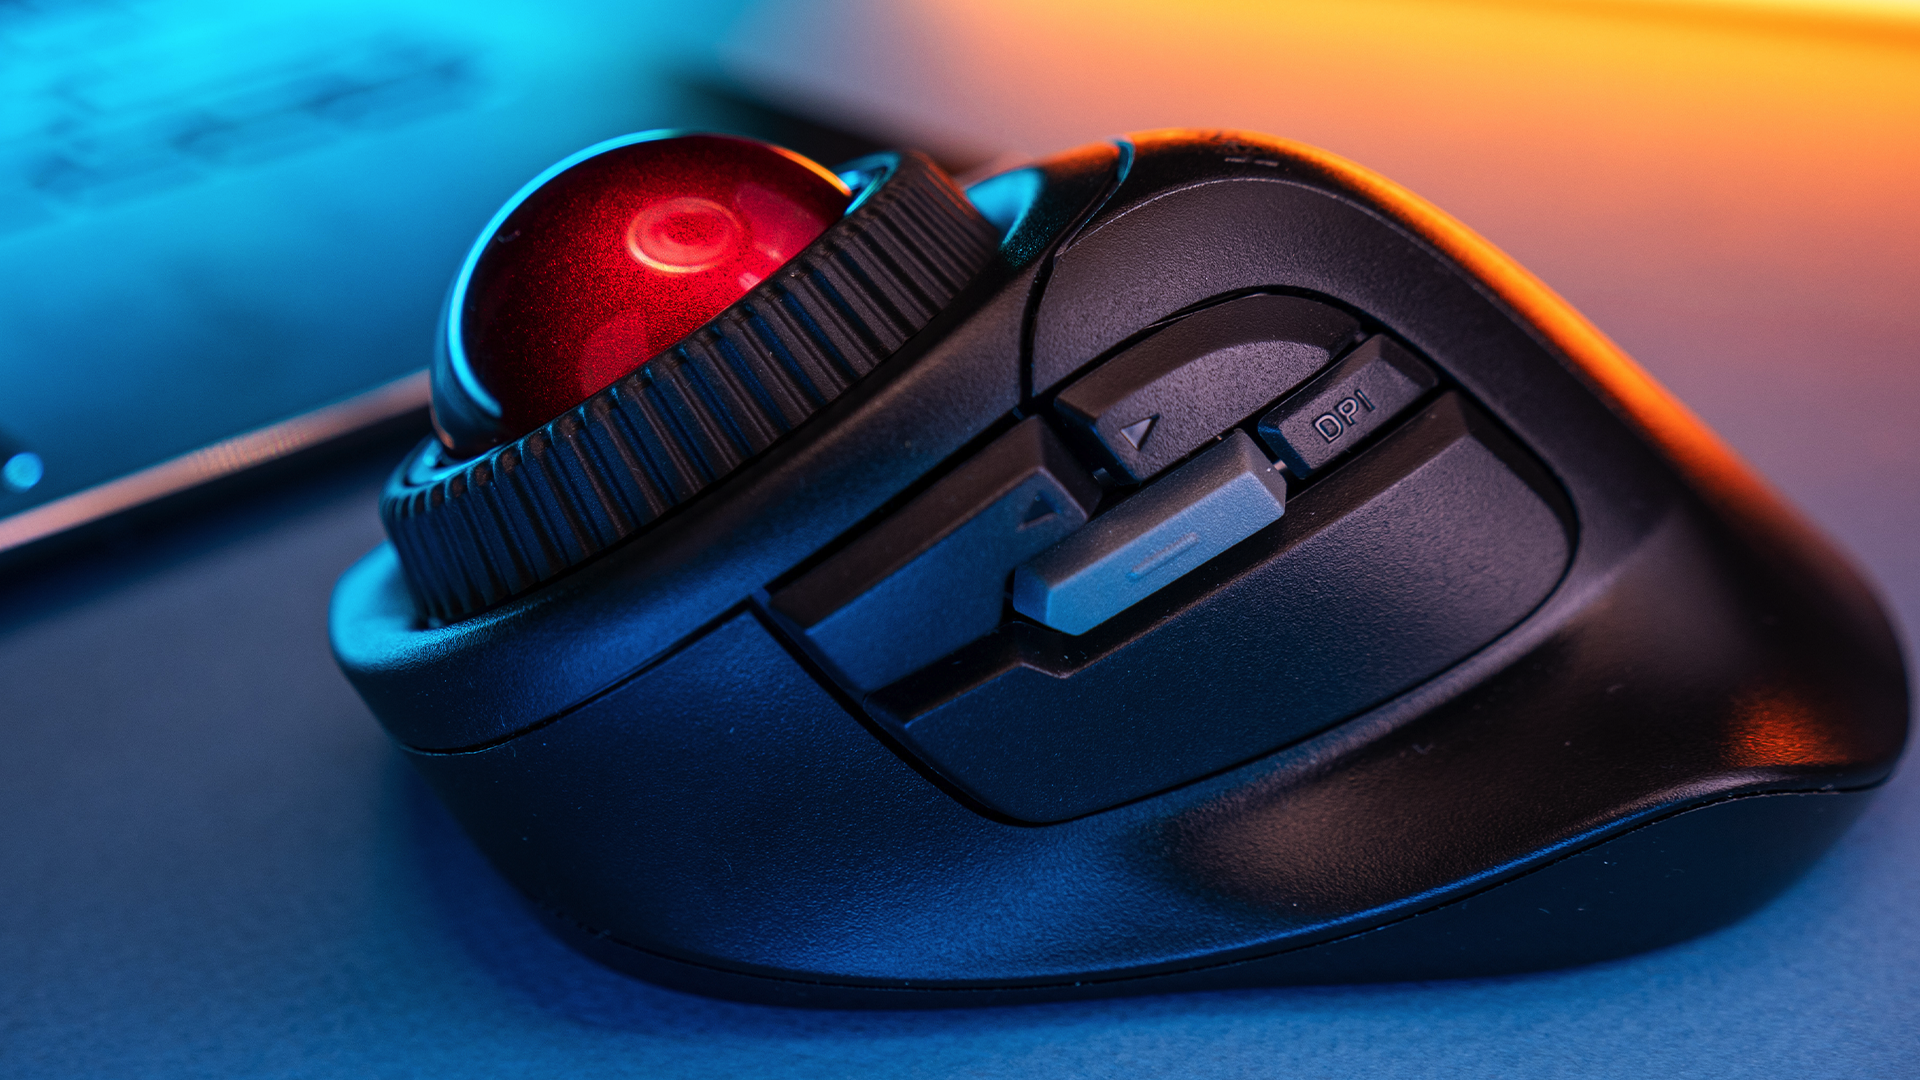 A photo of a trackball mouse.